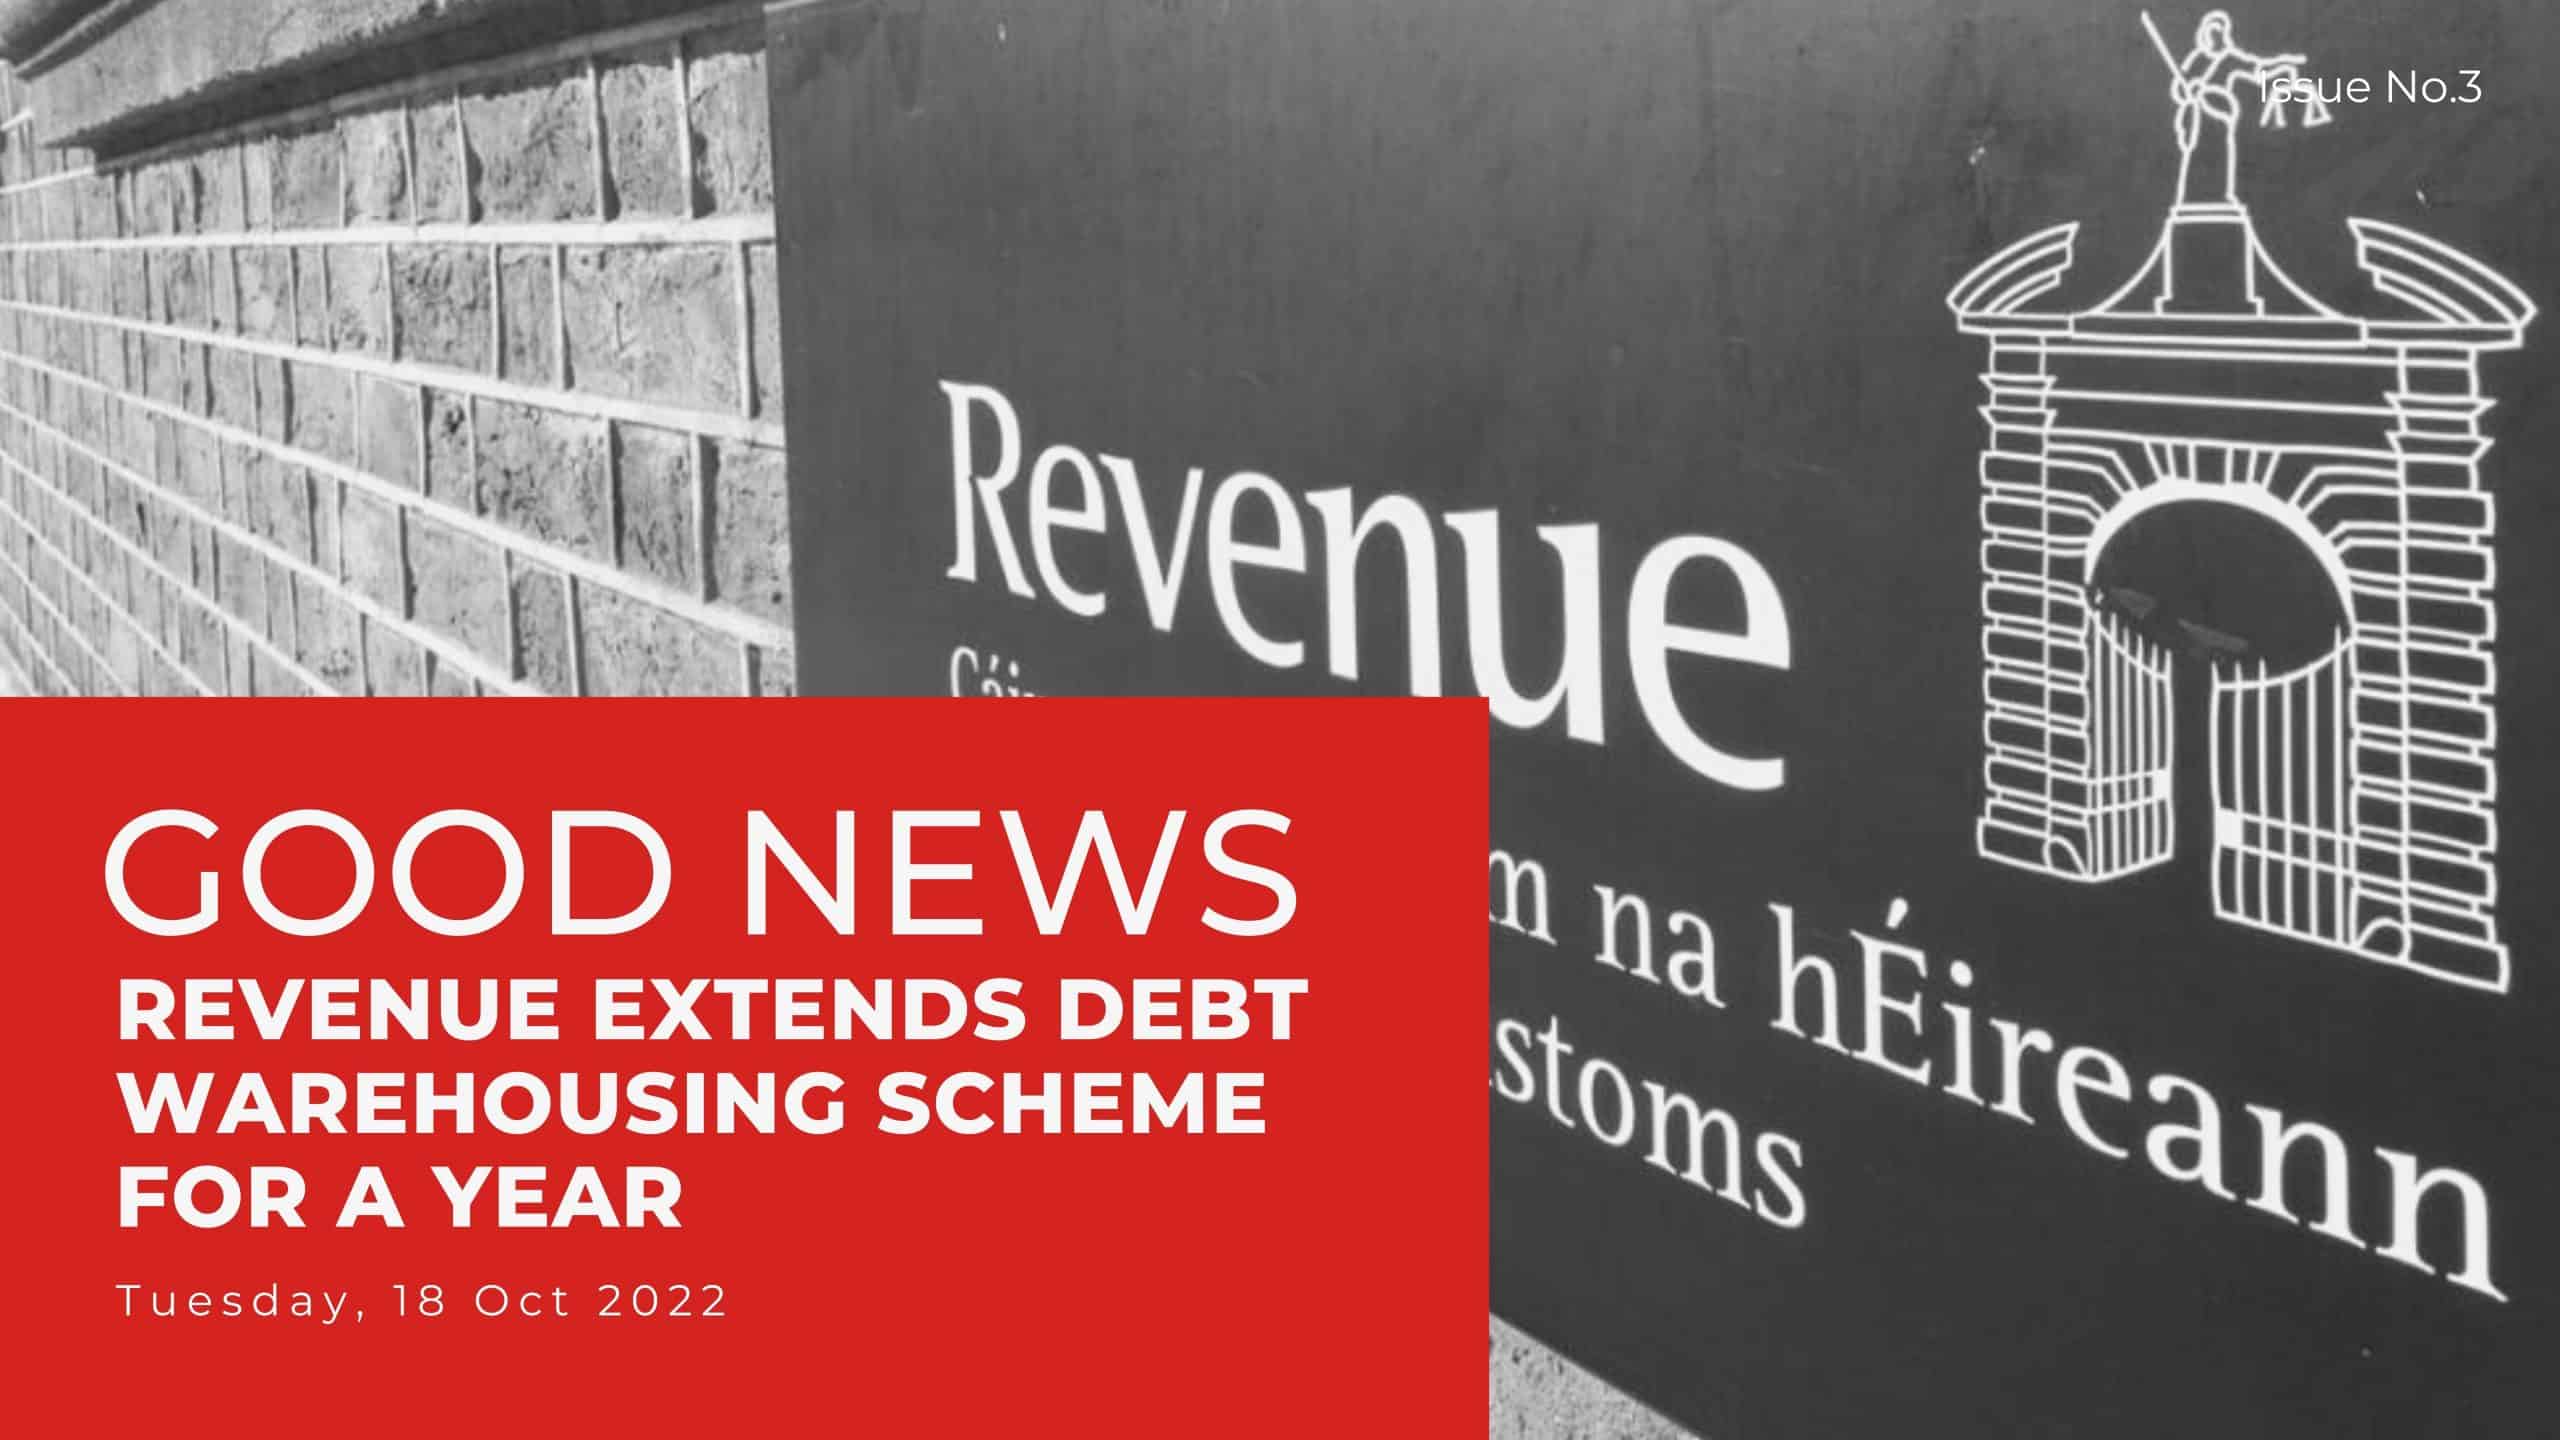 You are currently viewing REVENUE EXTENDS DEBT WAREHOUSING SCHEME FOR A YEAR